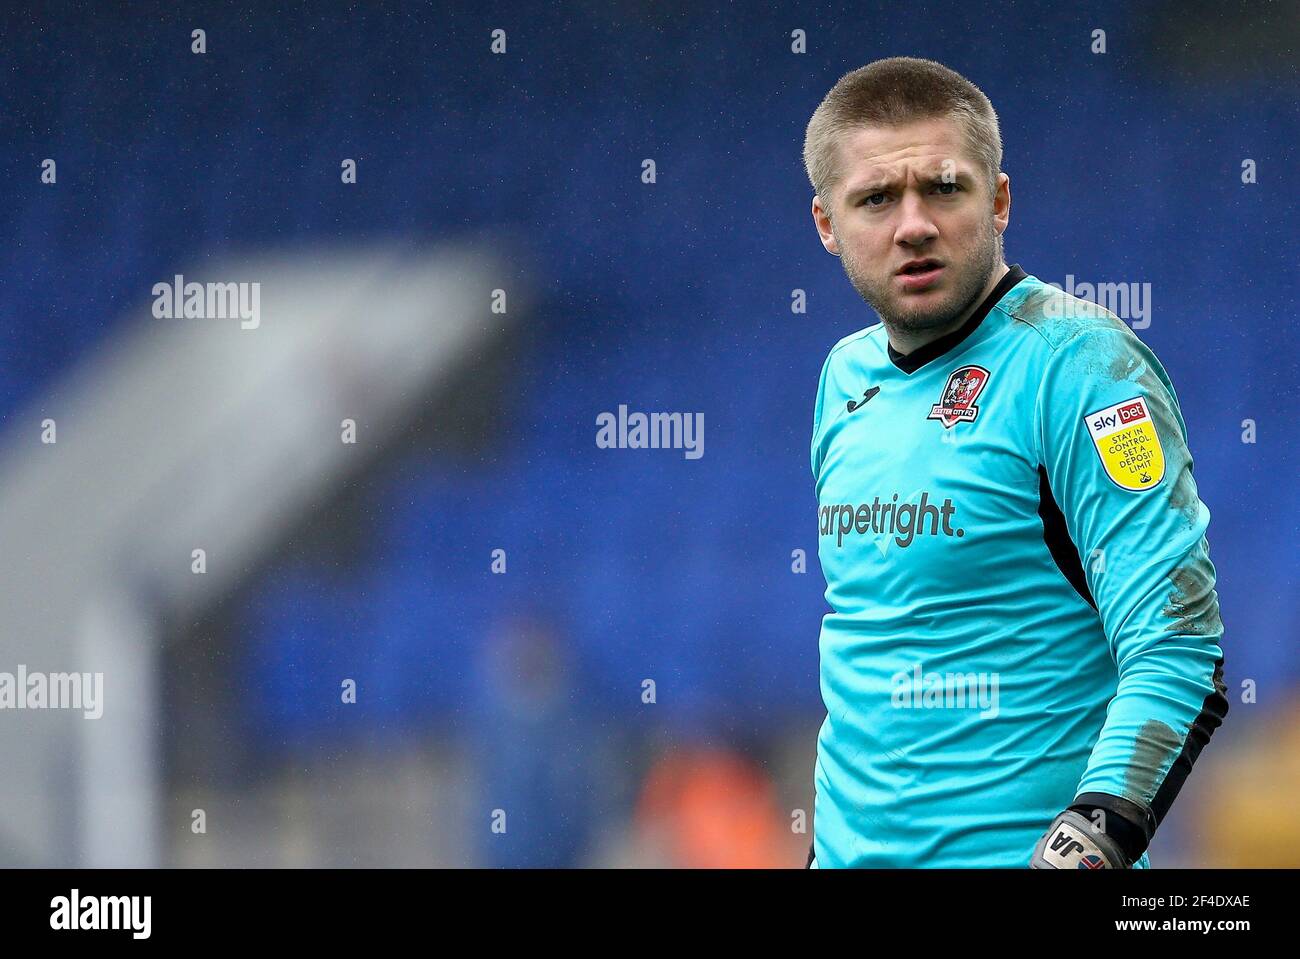 Exeter City Goalkeeper High Resolution Stock Photography And Images Alamy